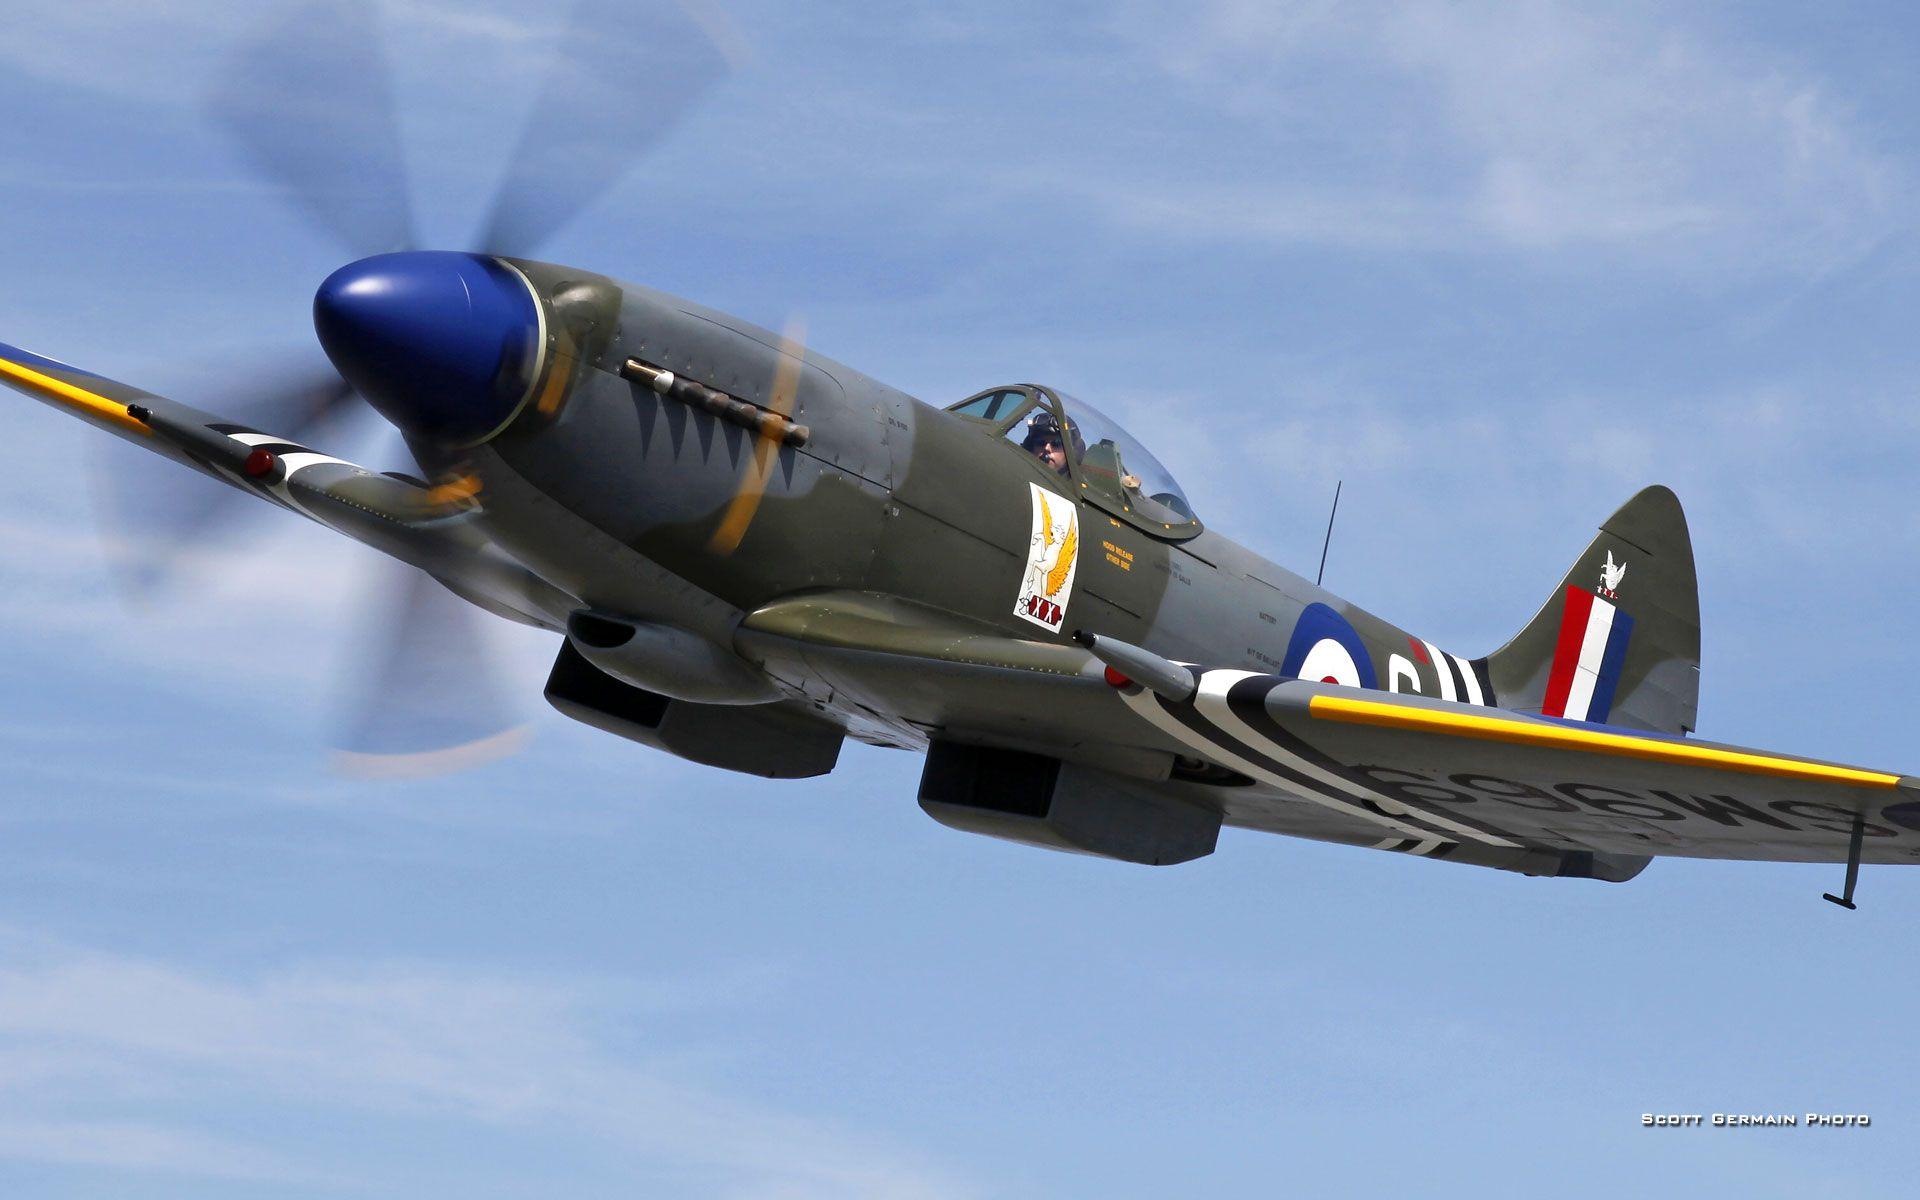 Spitfire Wallpaper Collection For Free Download. HD Wallpaper